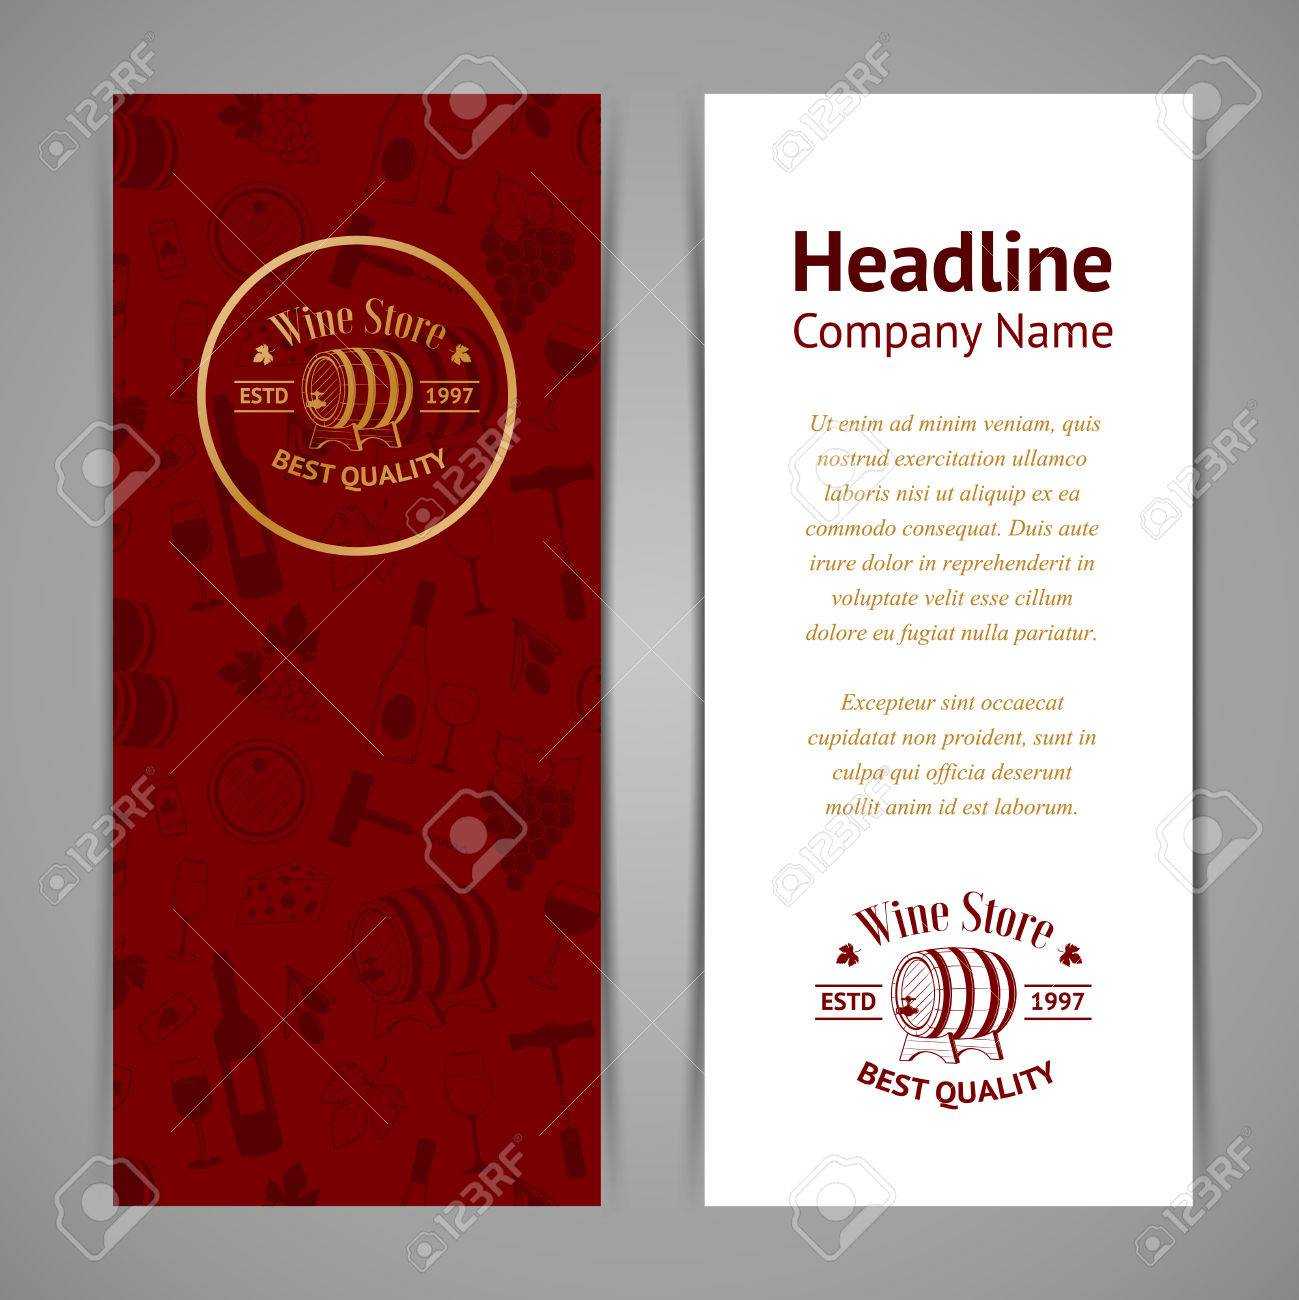 Set Of Business Cards. Templates For Wine Company Pertaining To Company Business Cards Templates